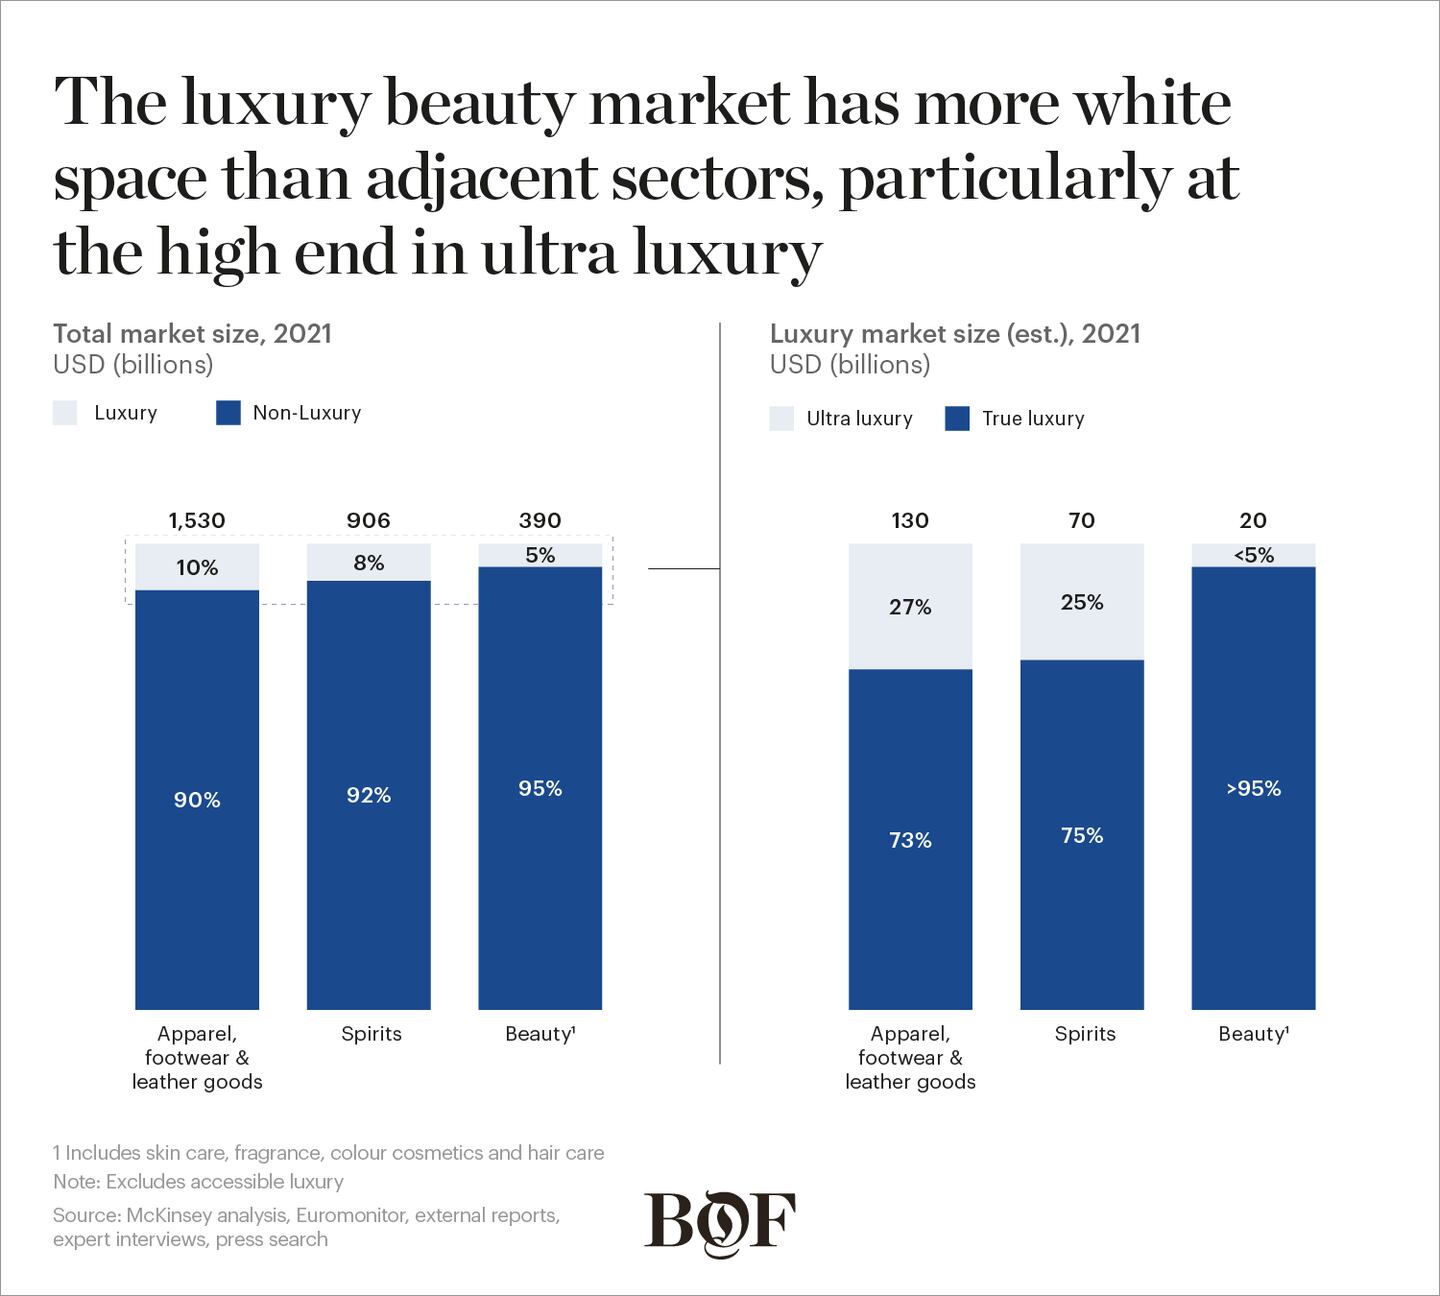 The luxury beauty market has more white space than adjacent sectors, particularly at the high end in ultra luxury.